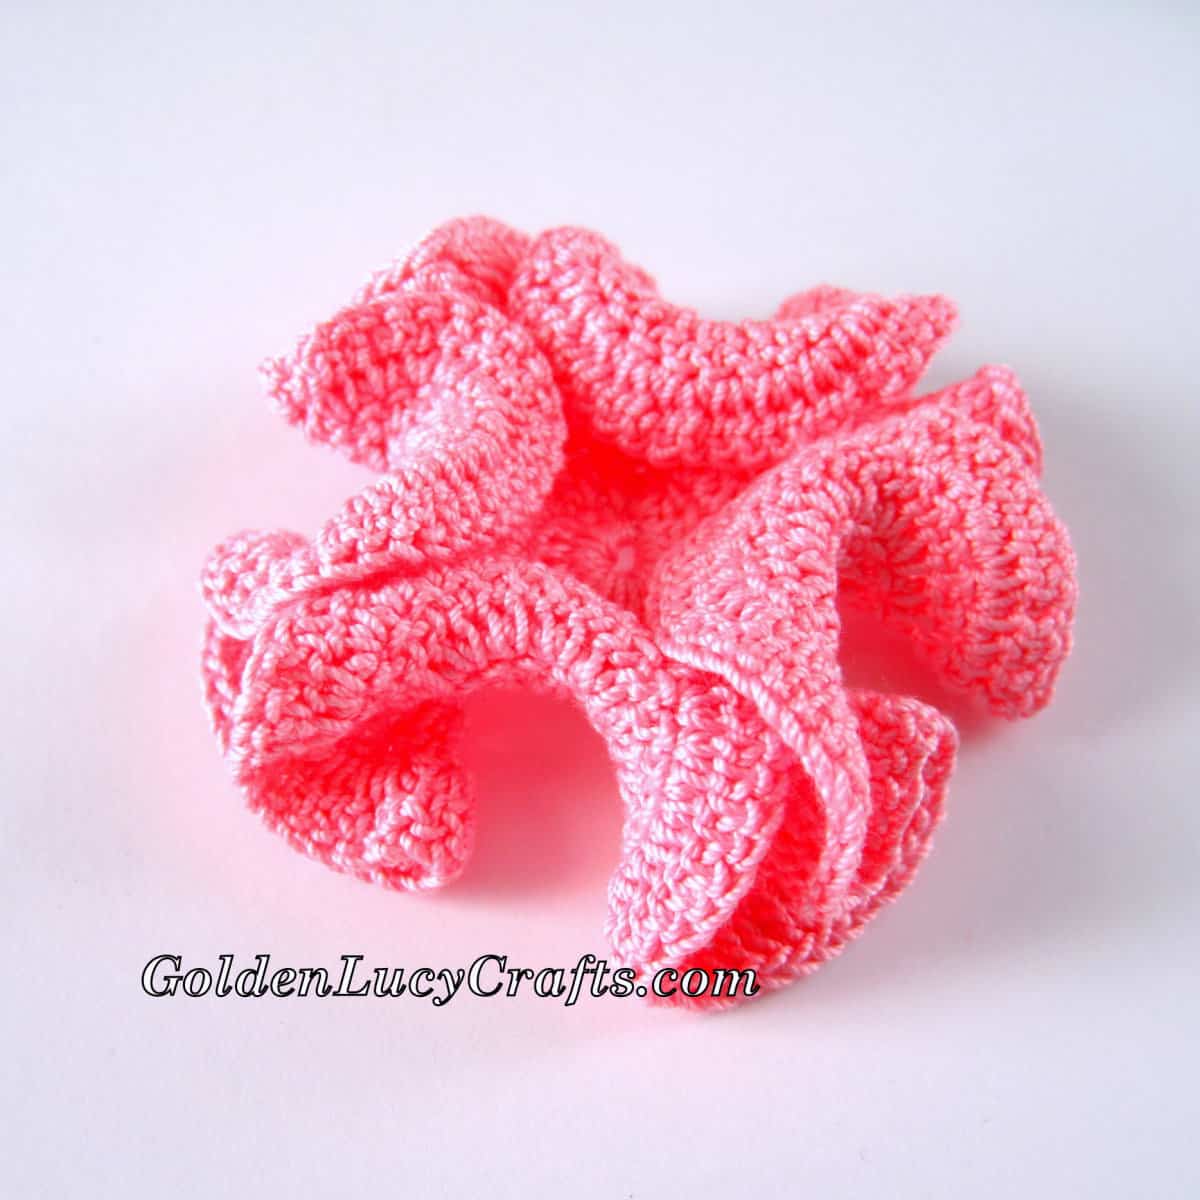 Crochet hyperbolic coral in pink color.